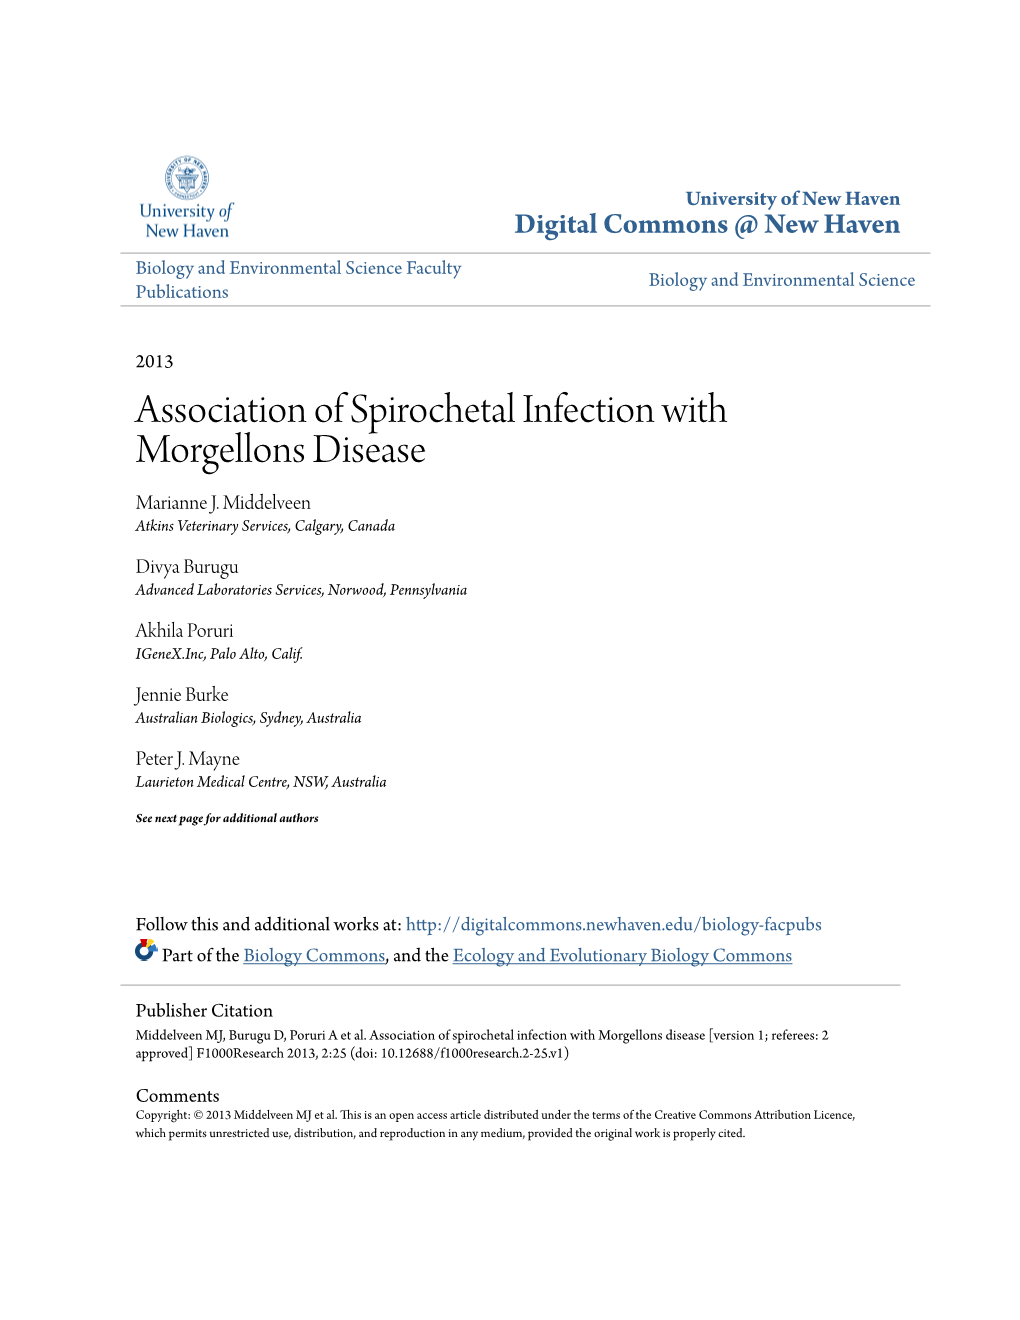 Association of Spirochetal Infection with Morgellons Disease Marianne J